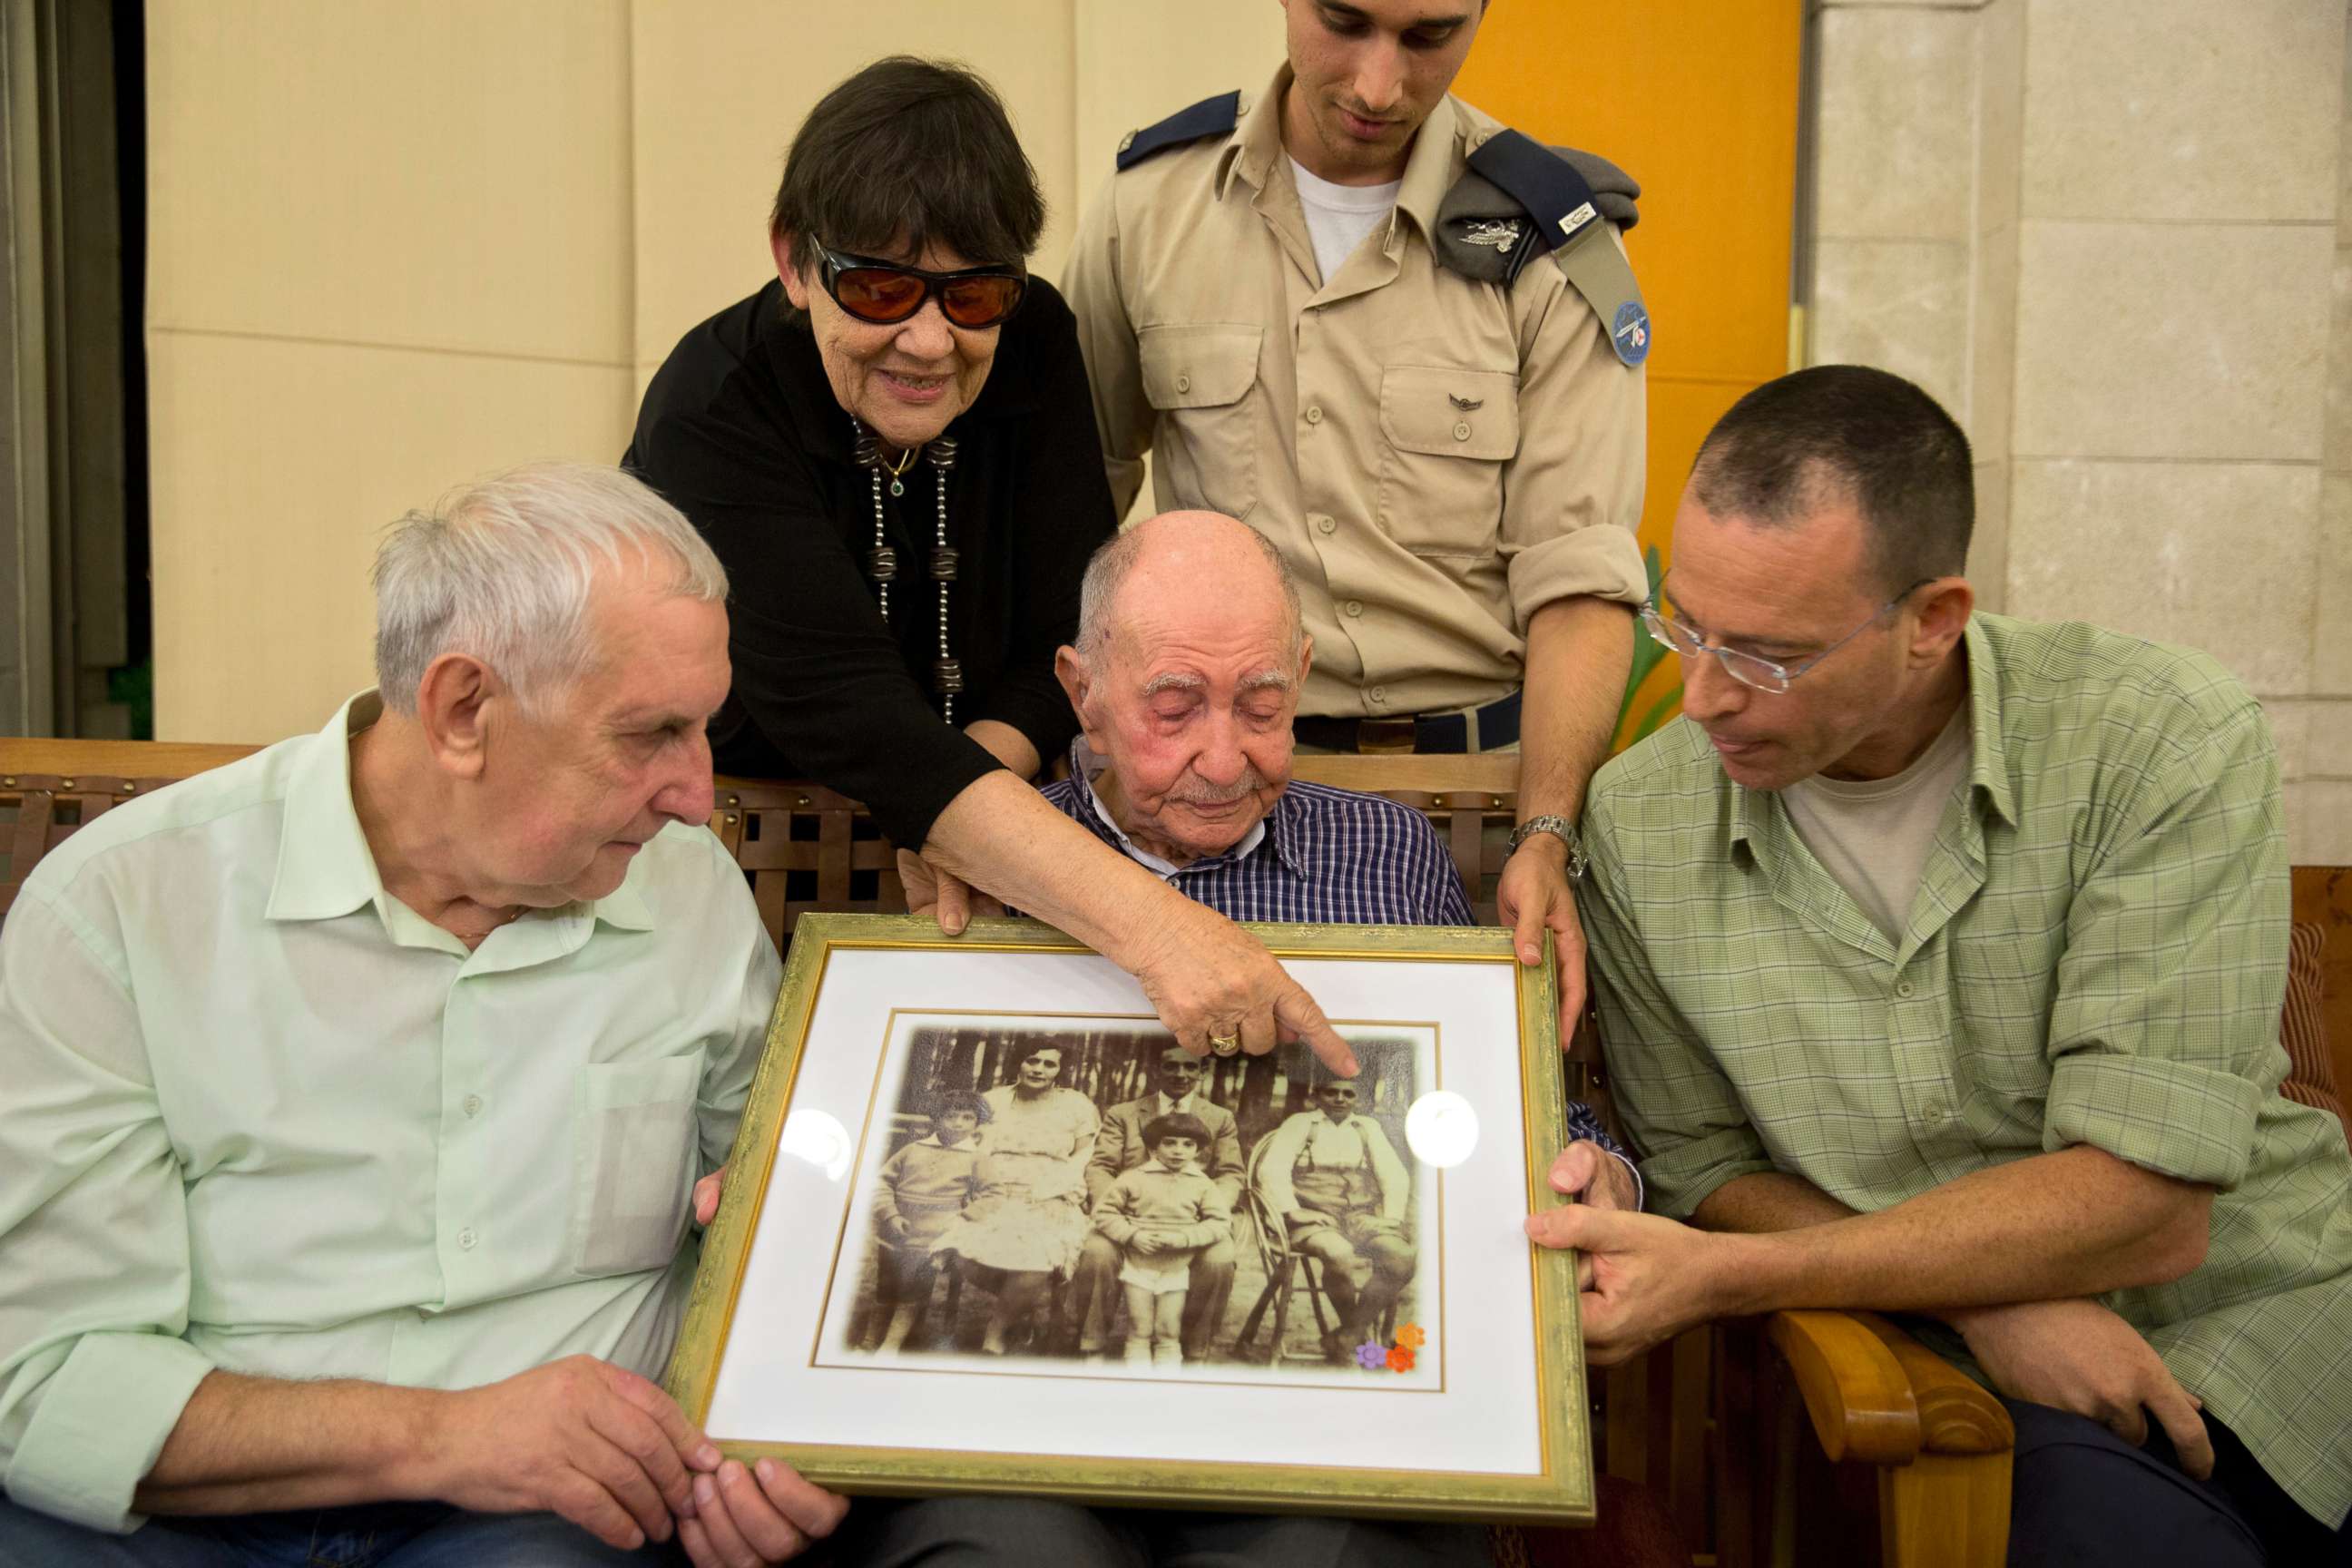 PHOTO: Israeli Holocaust survivor Eliahu Pietruszka, center, looks at a picture with Alexandre Pietruszka and family in the central Israeli city of Kfar Saba, Israel, Nov. 16, 2017.